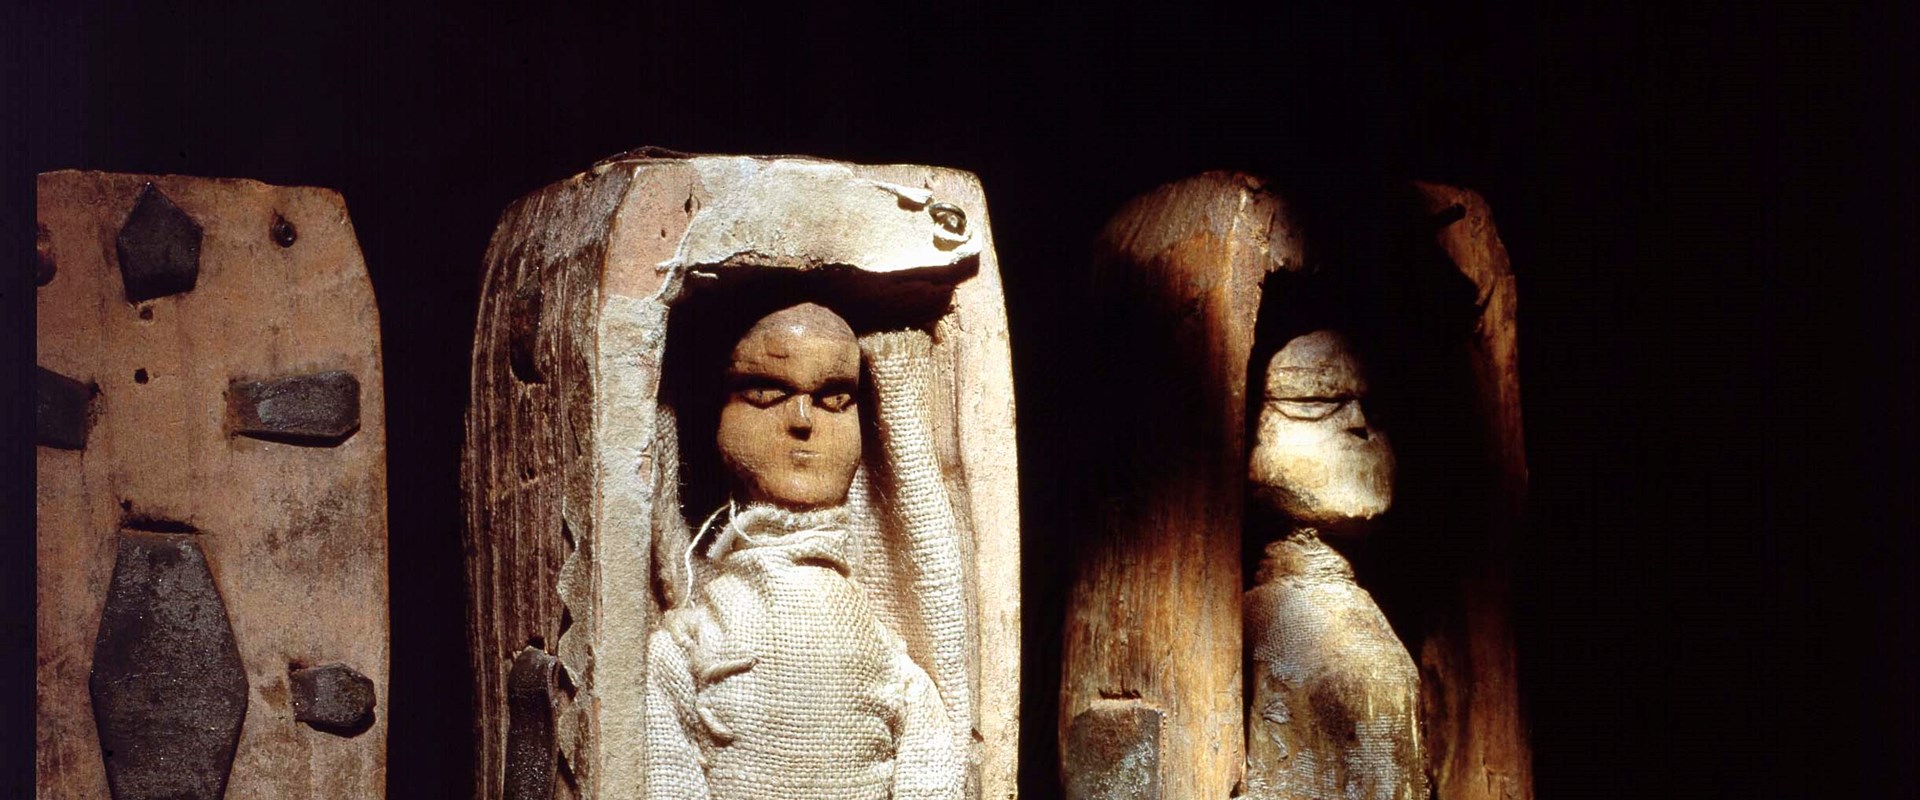 Two coffins with dolls inside, upright against a black background with heavy shadows cast over the coffins to create a spooky atmosphere.